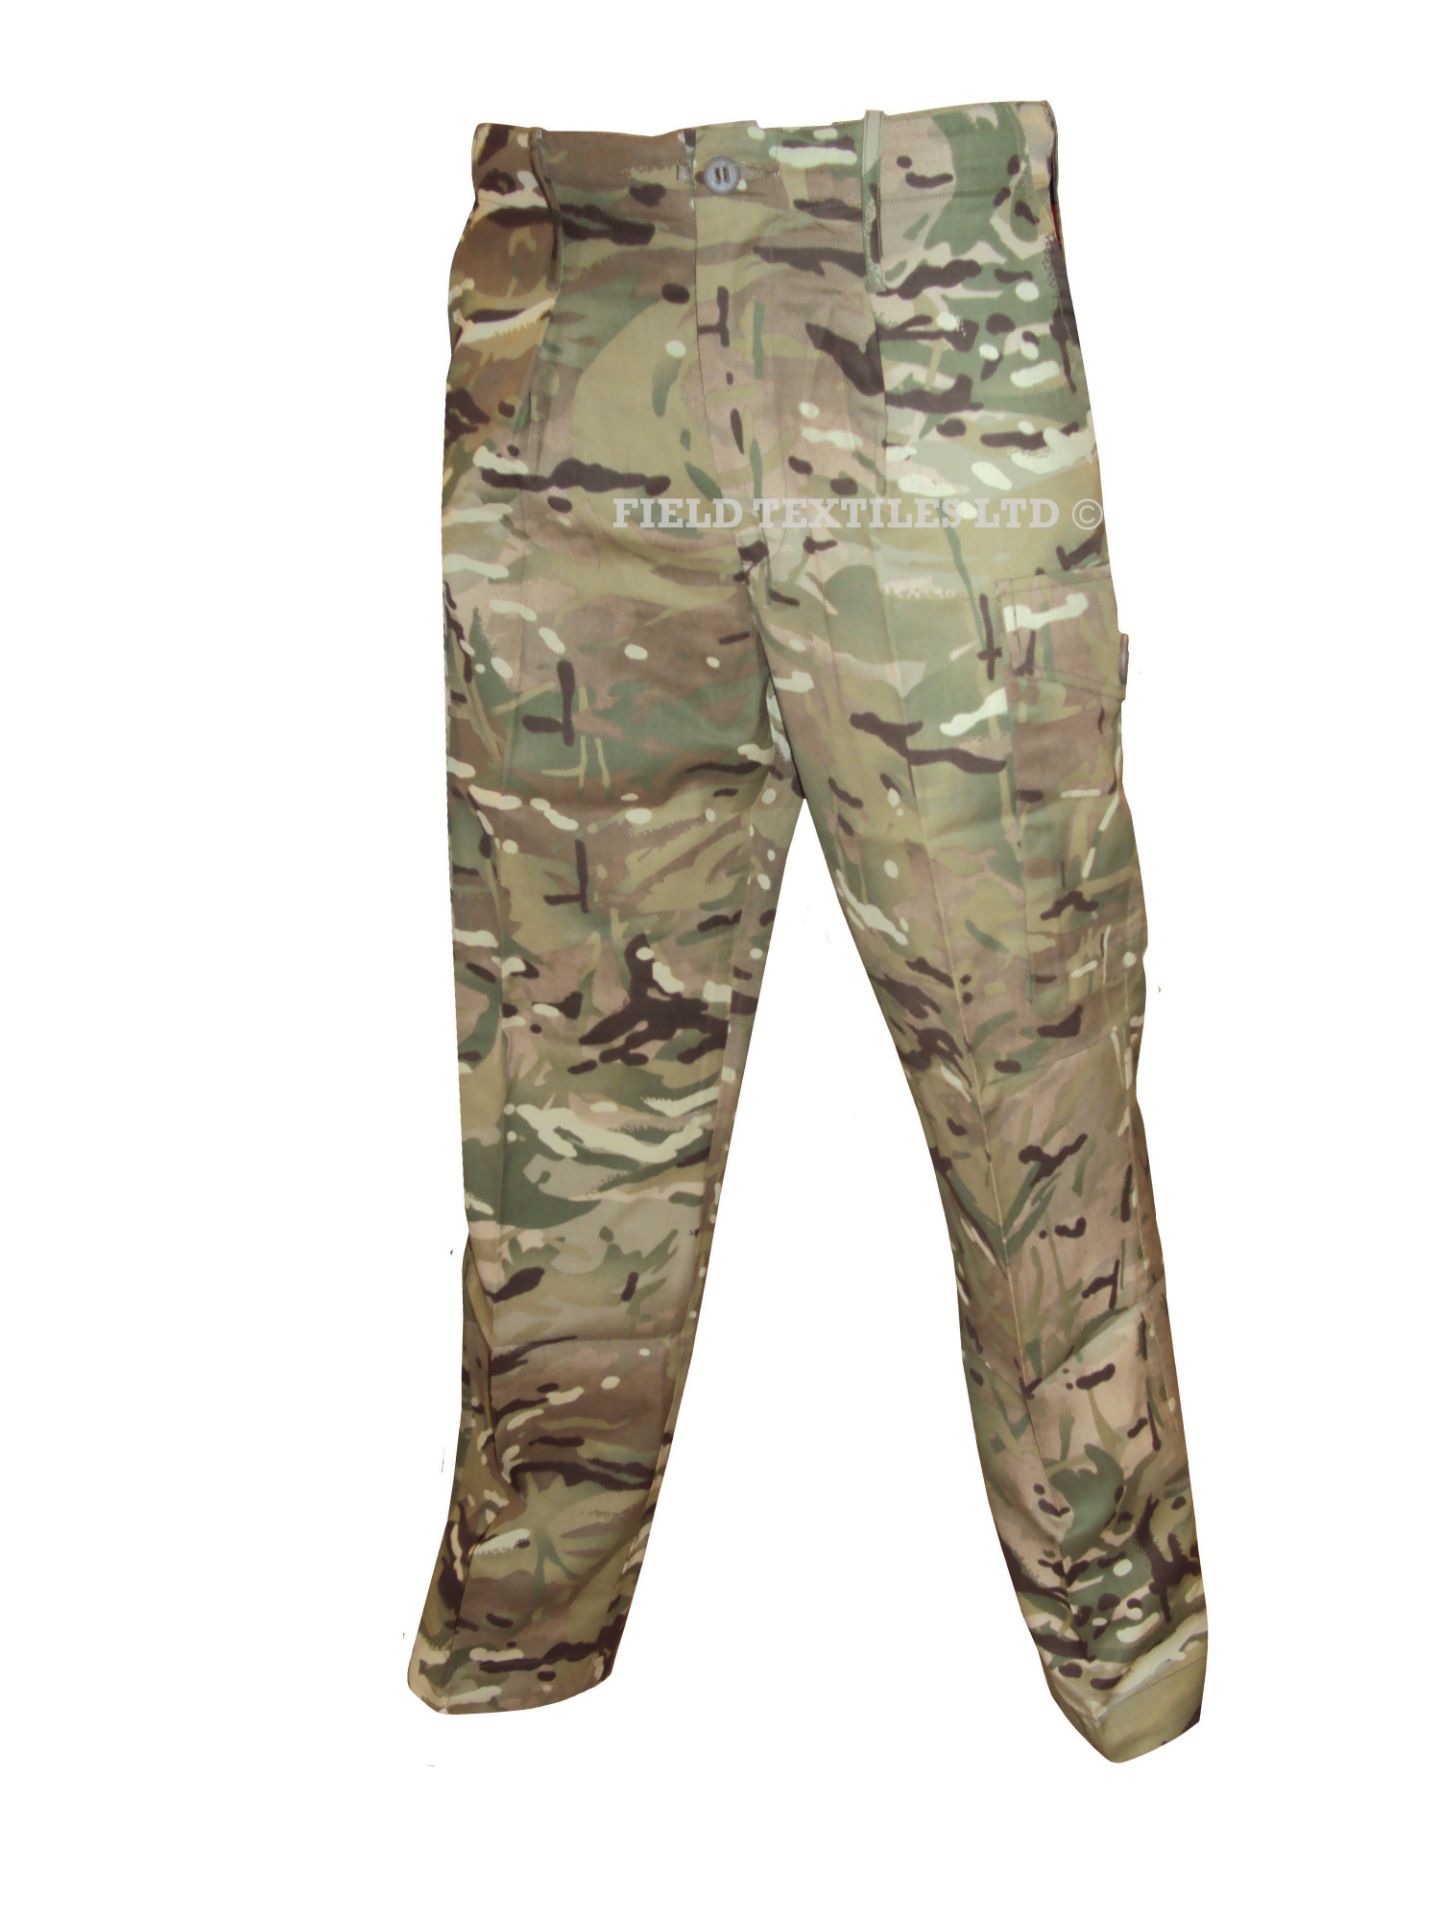 Pack of 30 - MTP Combat Trousers - Mix of Sizes - Grade 1